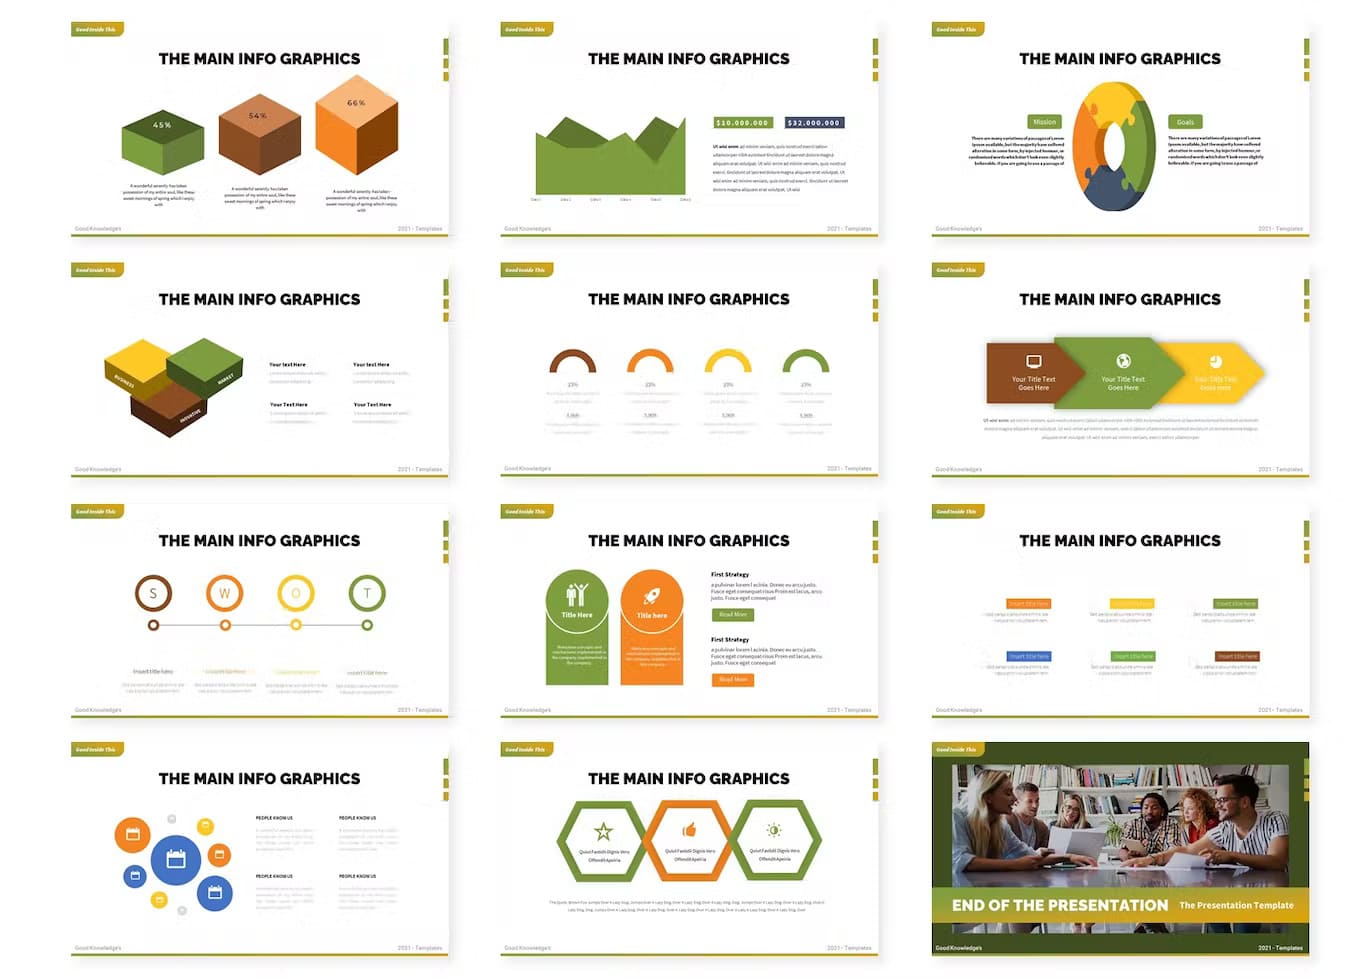 Business Planning, slides: The main infographics, end of the presentation.